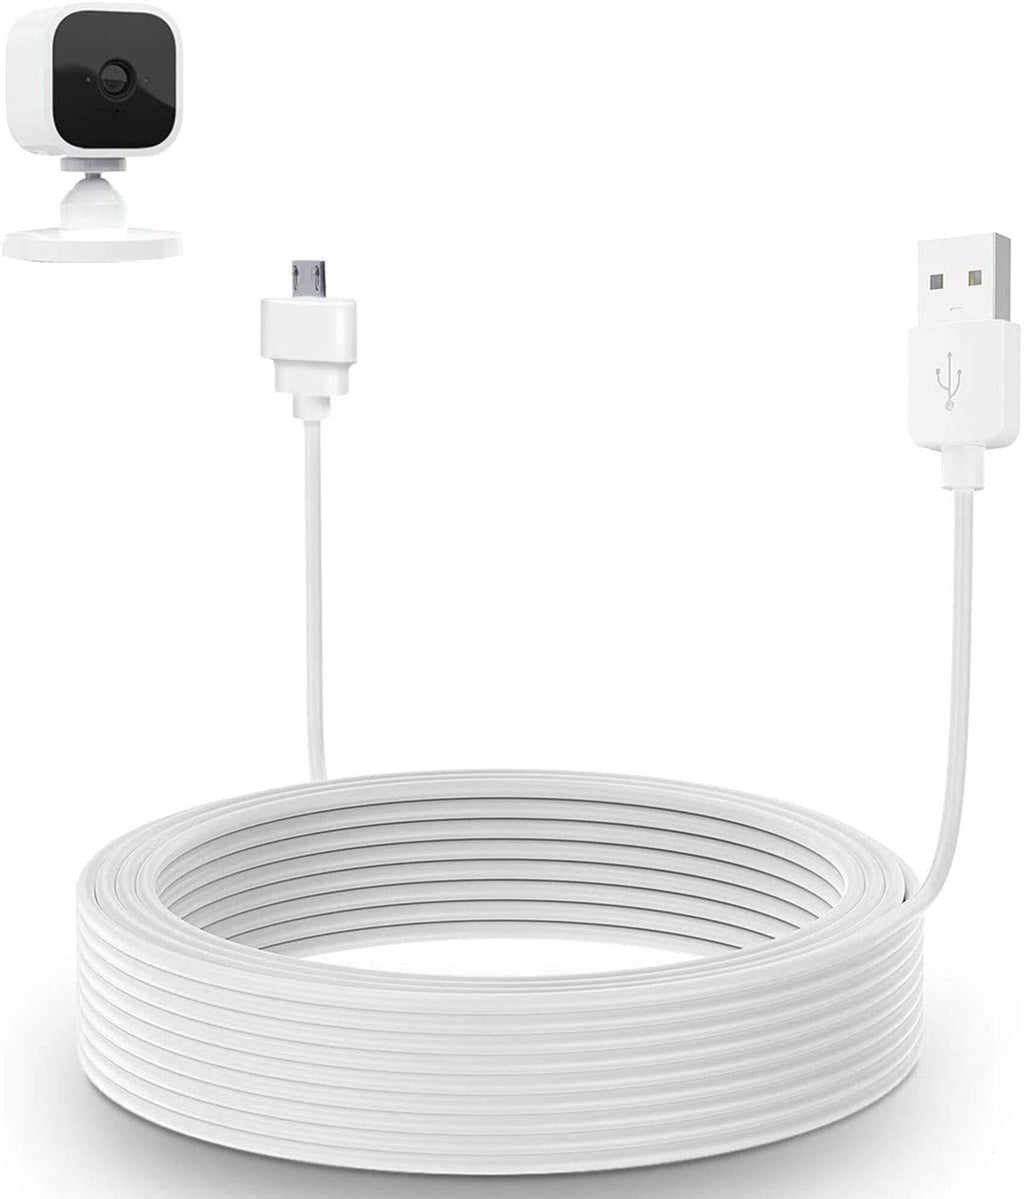 20ft/6m Charger Cable for Blink Mini, Power Extension USB Cable Compatible with Blink Mini Indoor Plug-in Camera Extension Cable(Blink Mini Camera is not Include) 6m/20ft